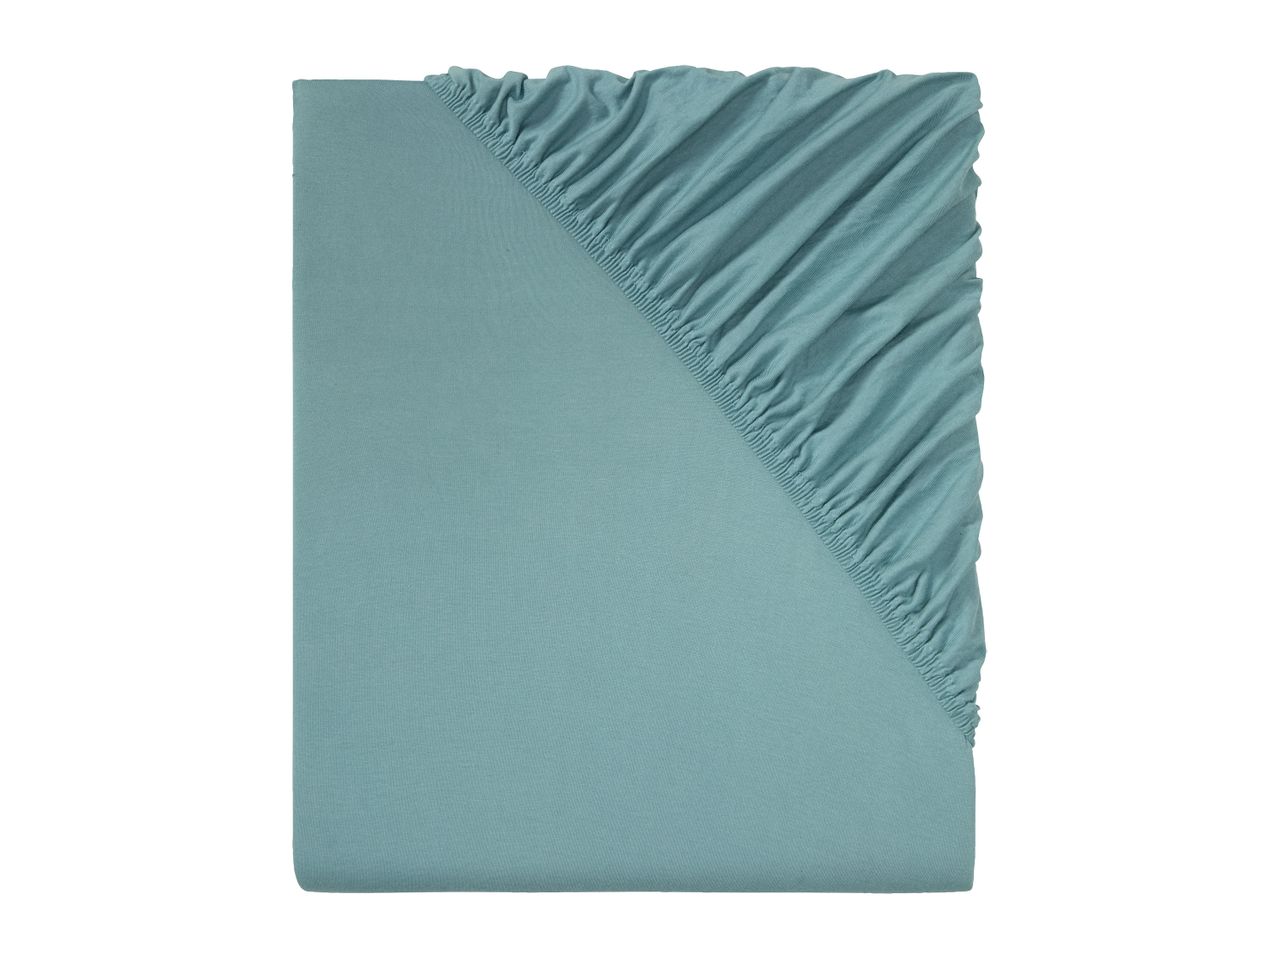 Go to full screen view: Livarno Home Jersey Fitted Sheet - King - Image 4